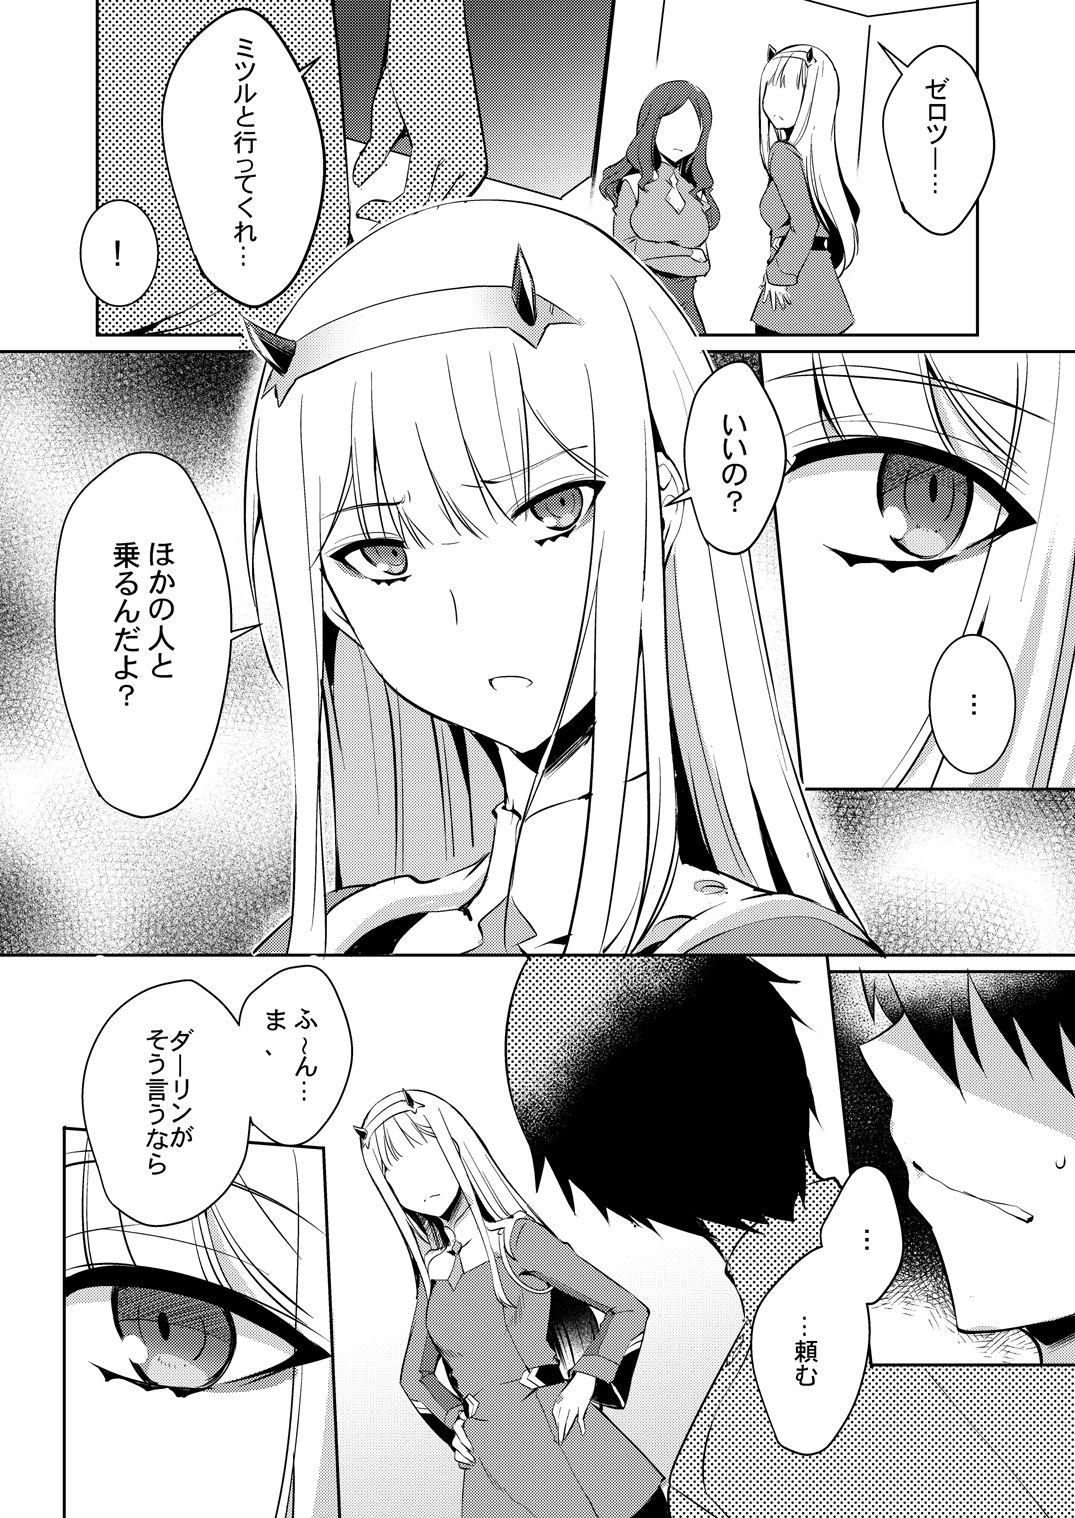 Ball Busting Mitsuru in the Zero Two - Darling in the franxx Breasts - Page 6